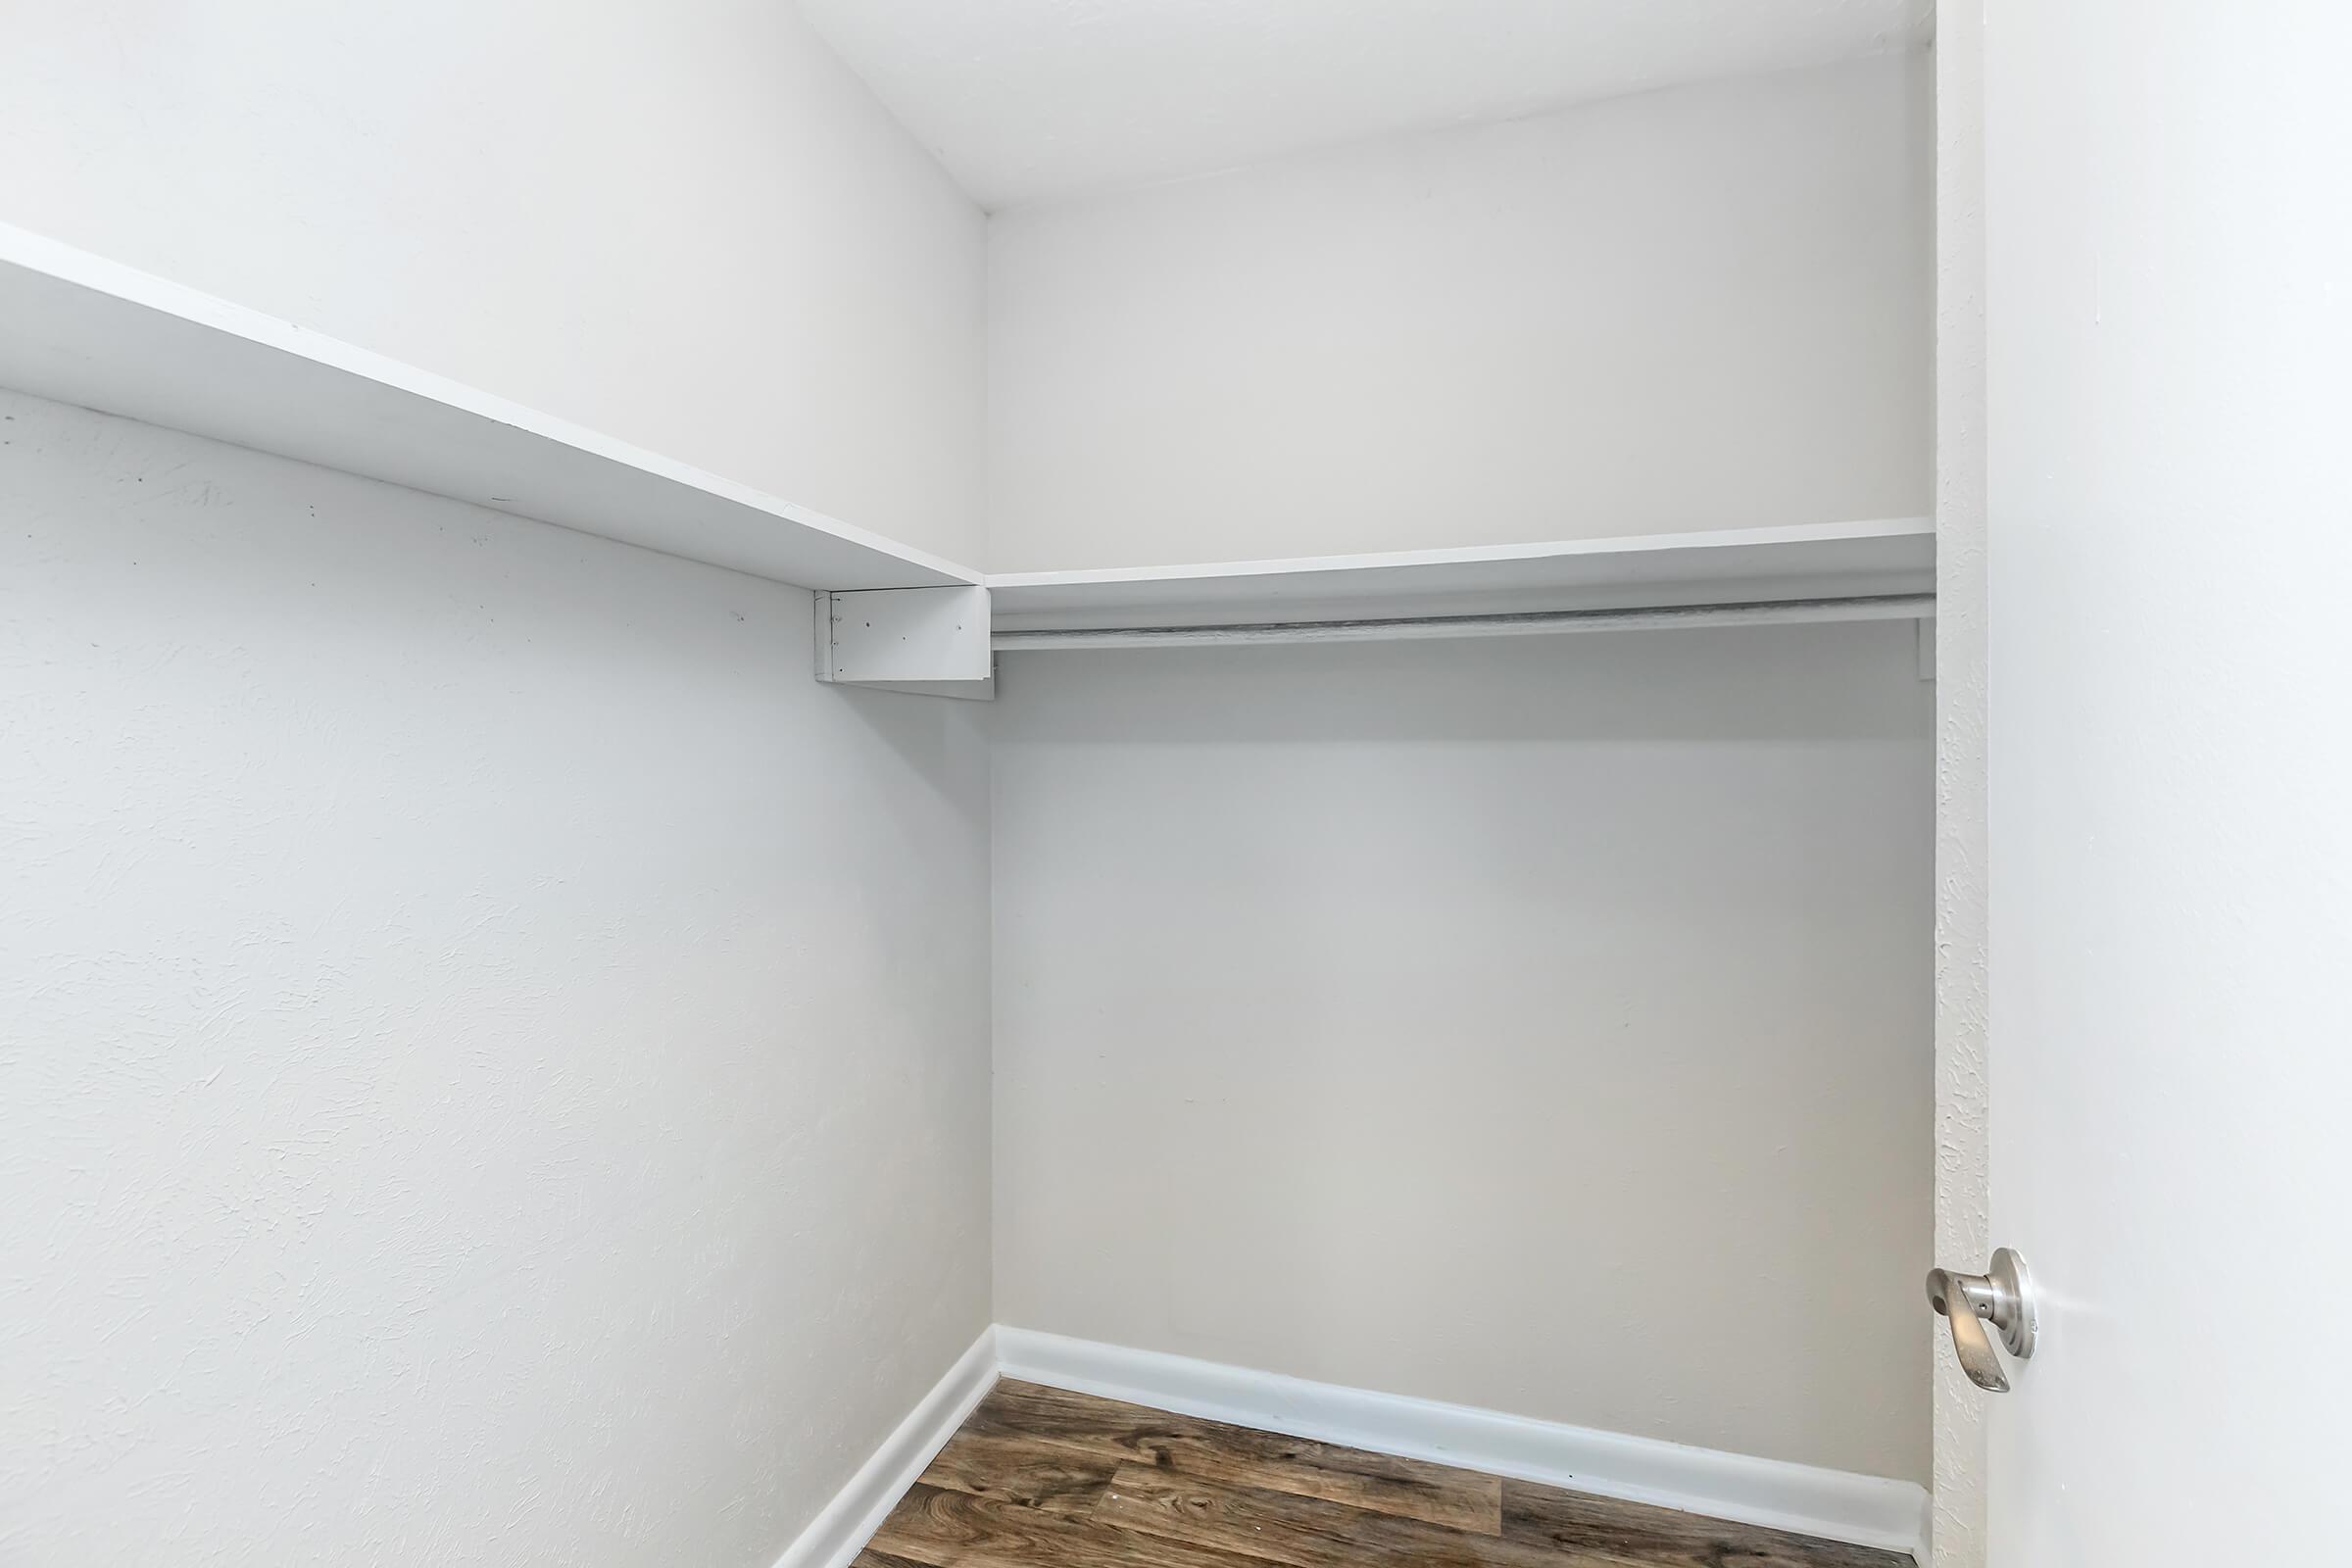 Walk-in Closet at Chase Cove Apartments in Nashville, TNS